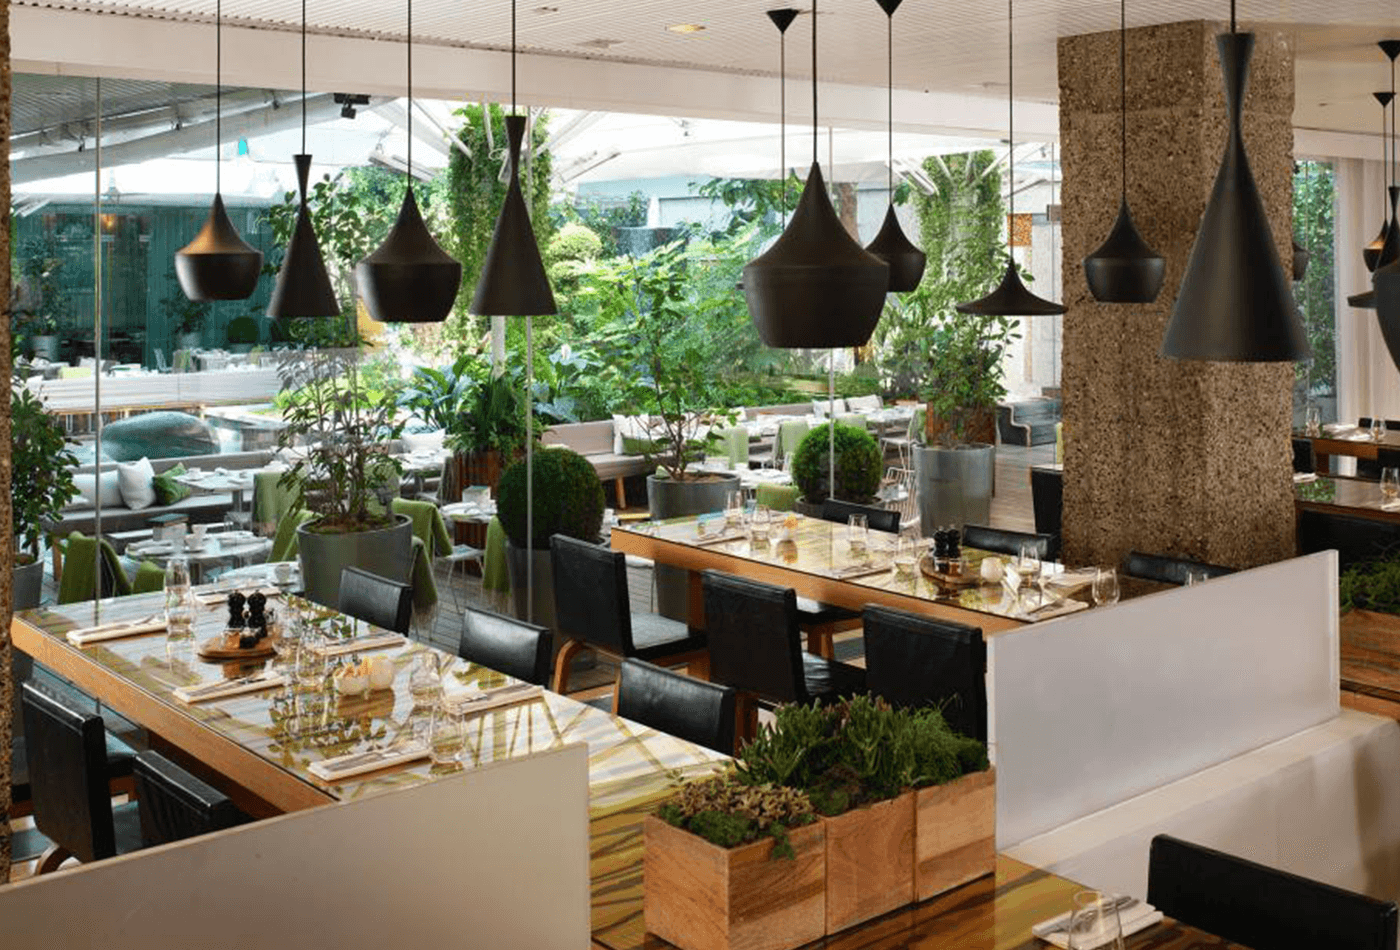 Modern dining area with lots of greenery